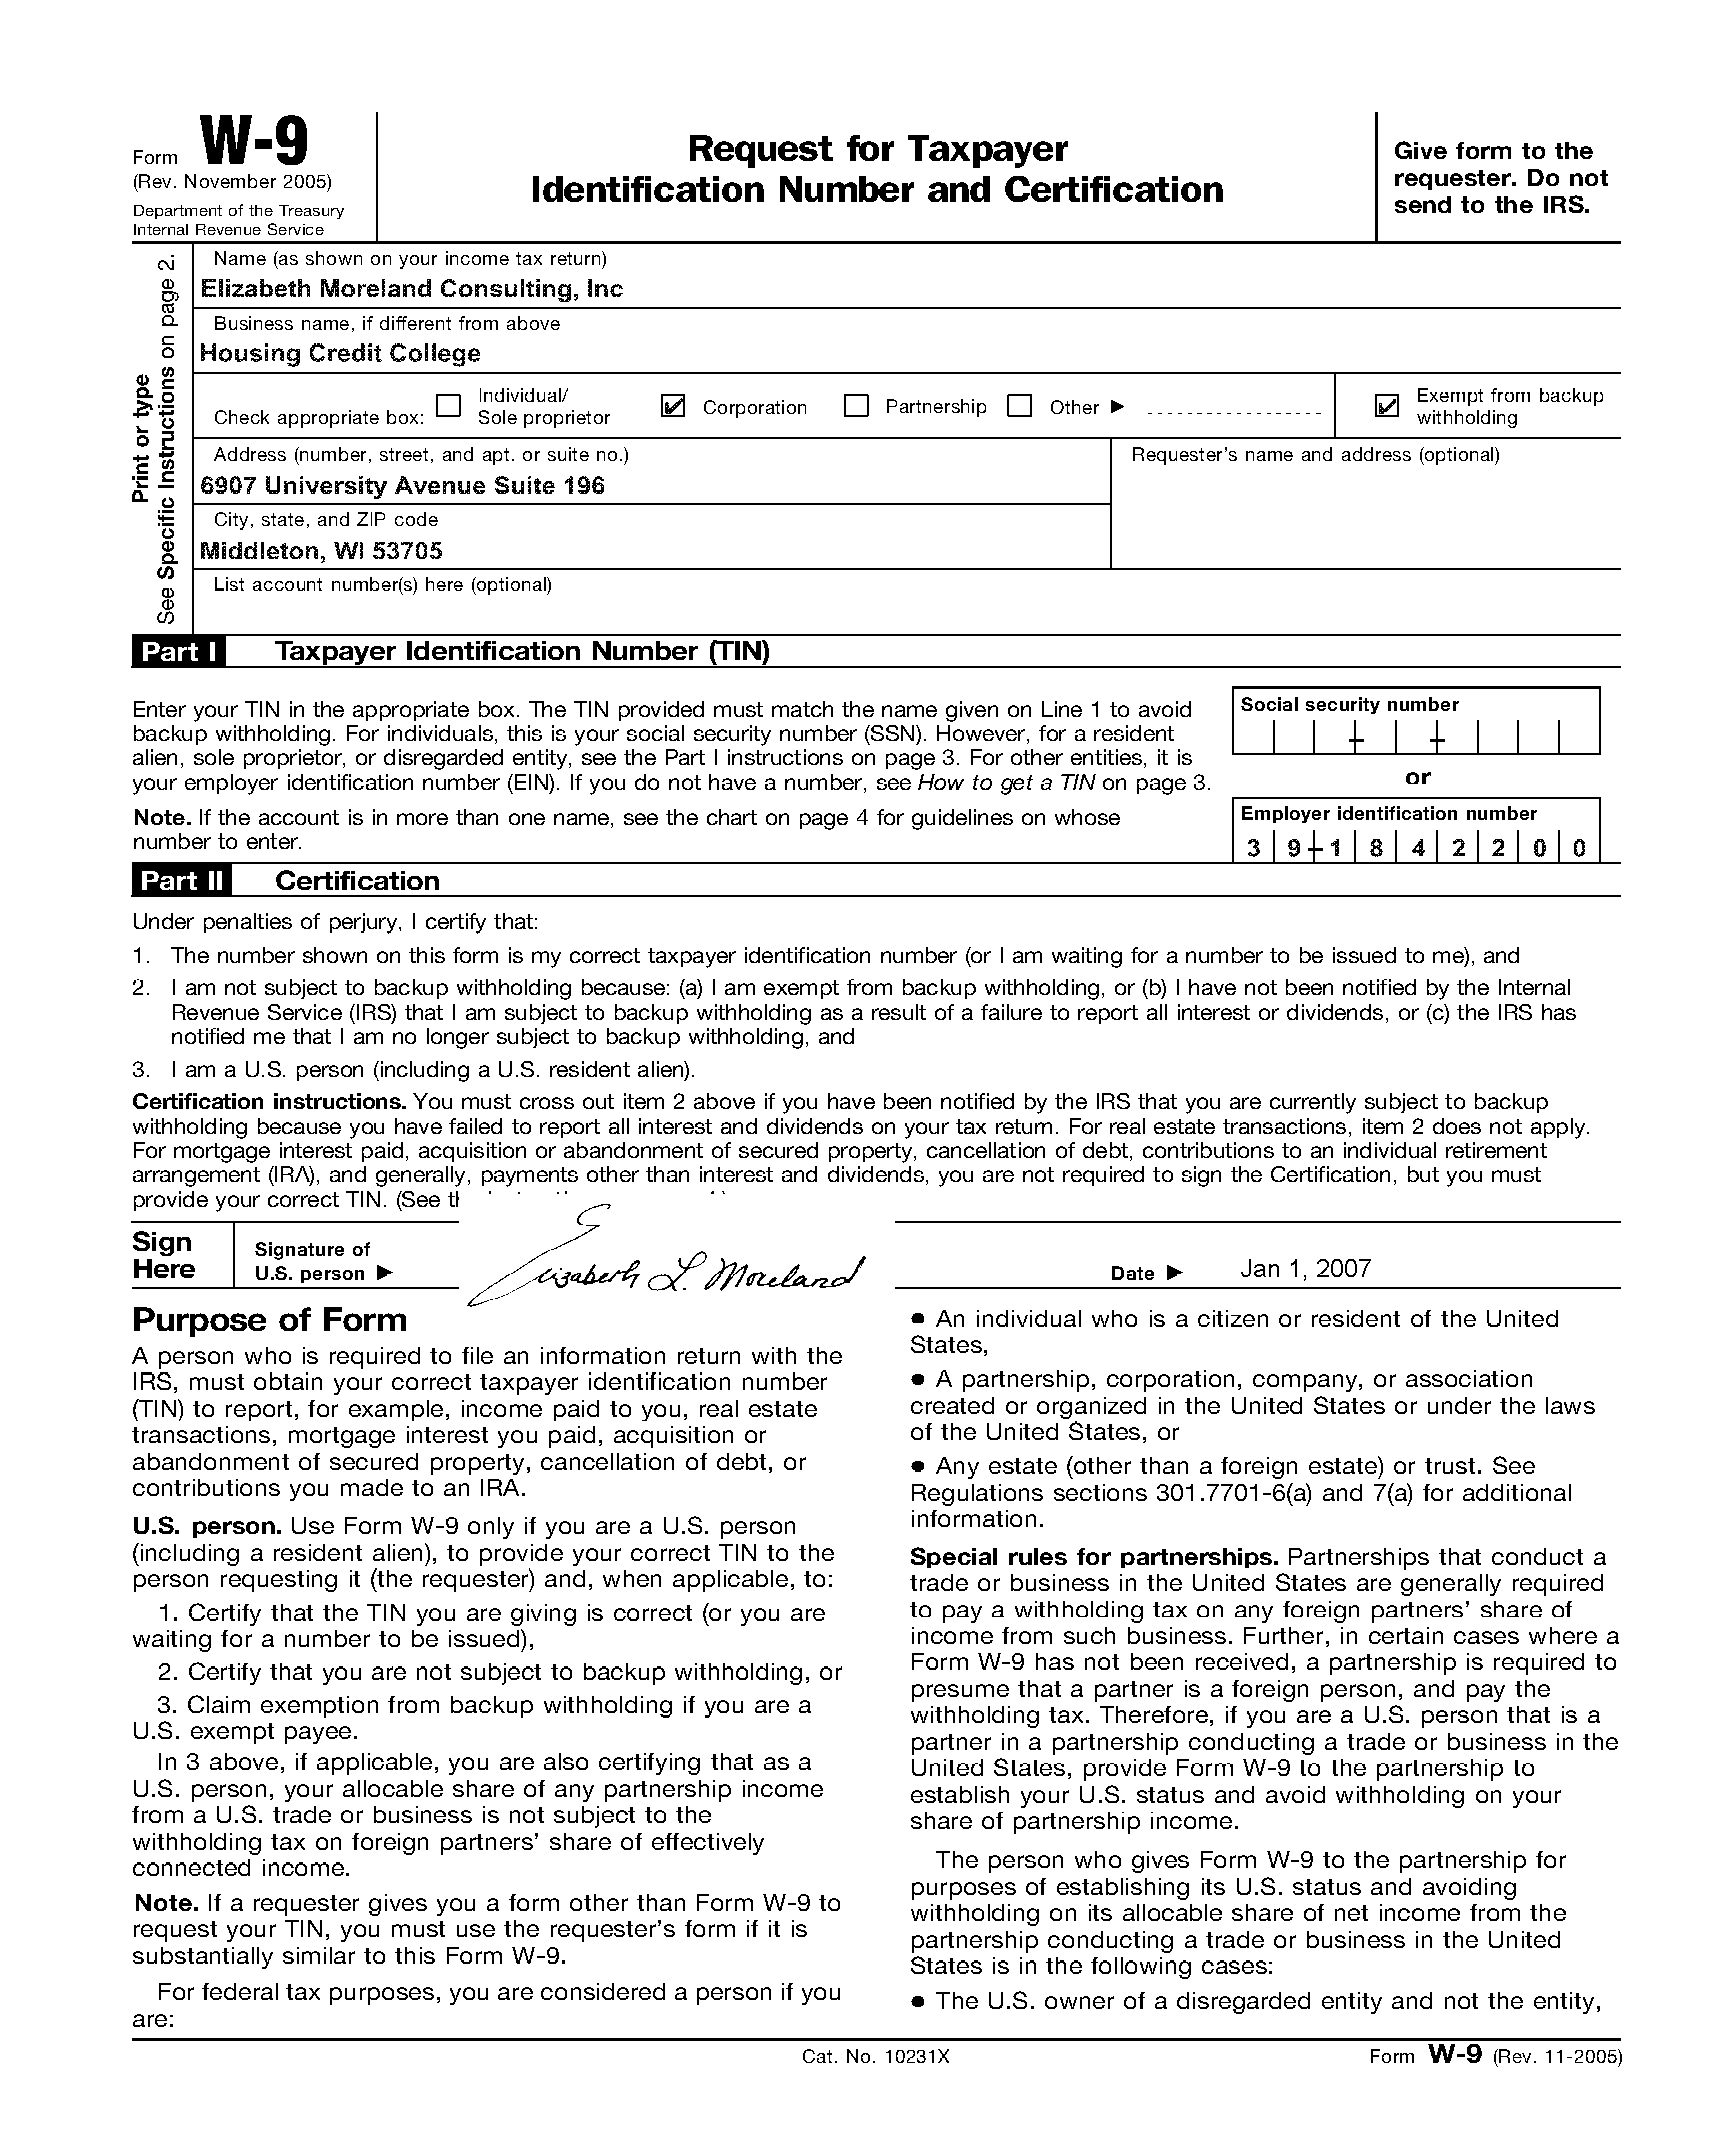 10 Best Photos Of What Does An Irs Form W 9 Look Like - W-9